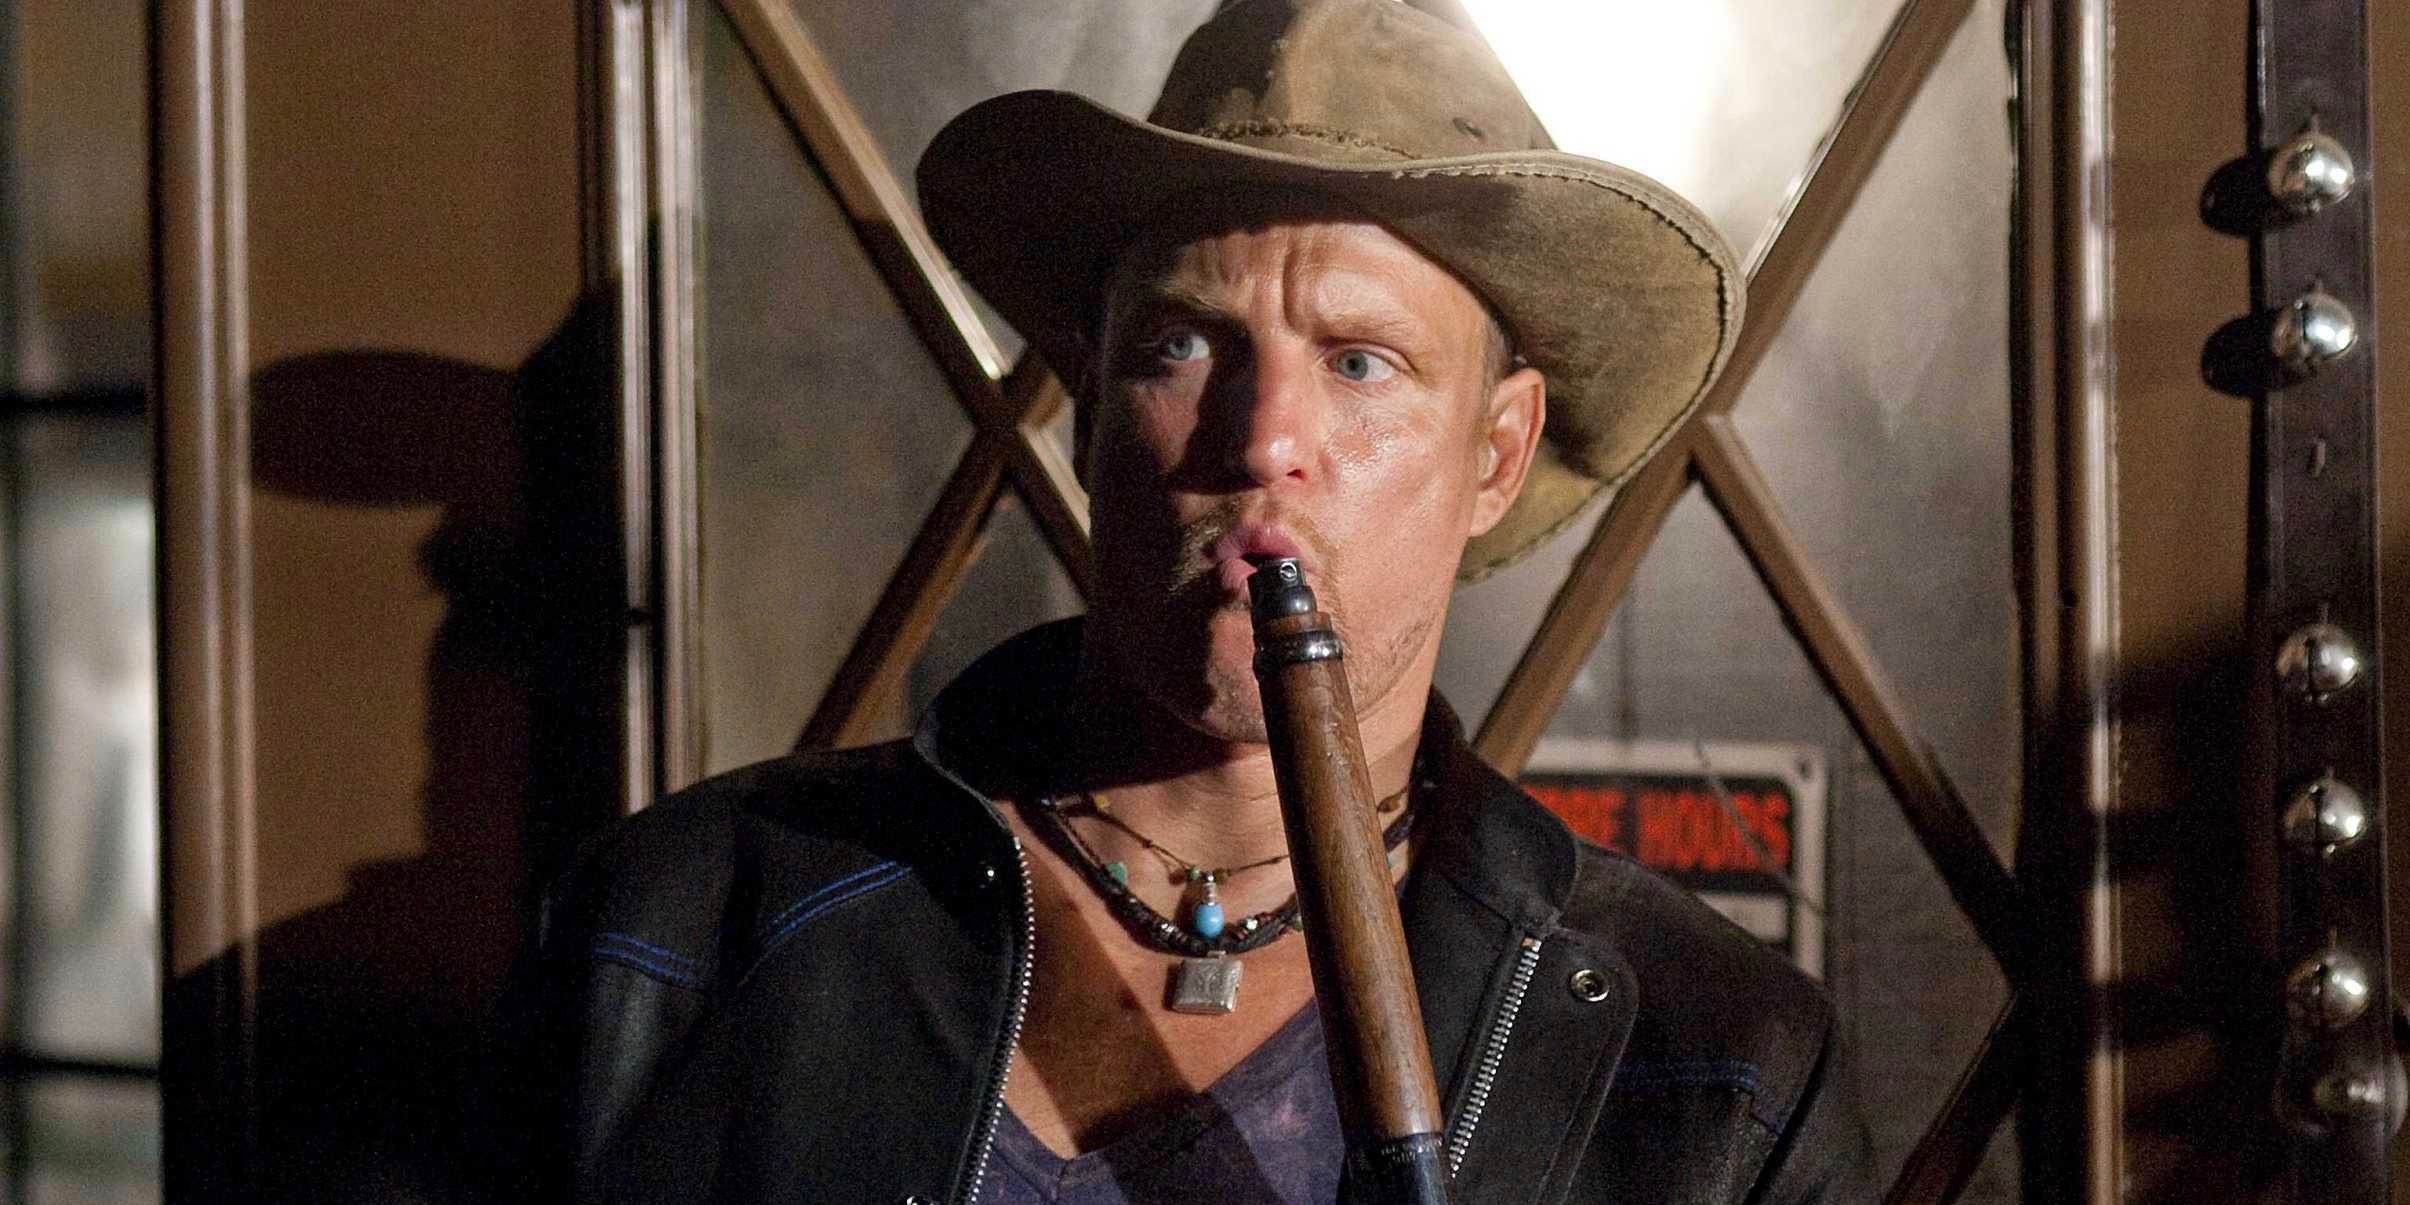 Woody Harrelson as Talahassee in Zombieland